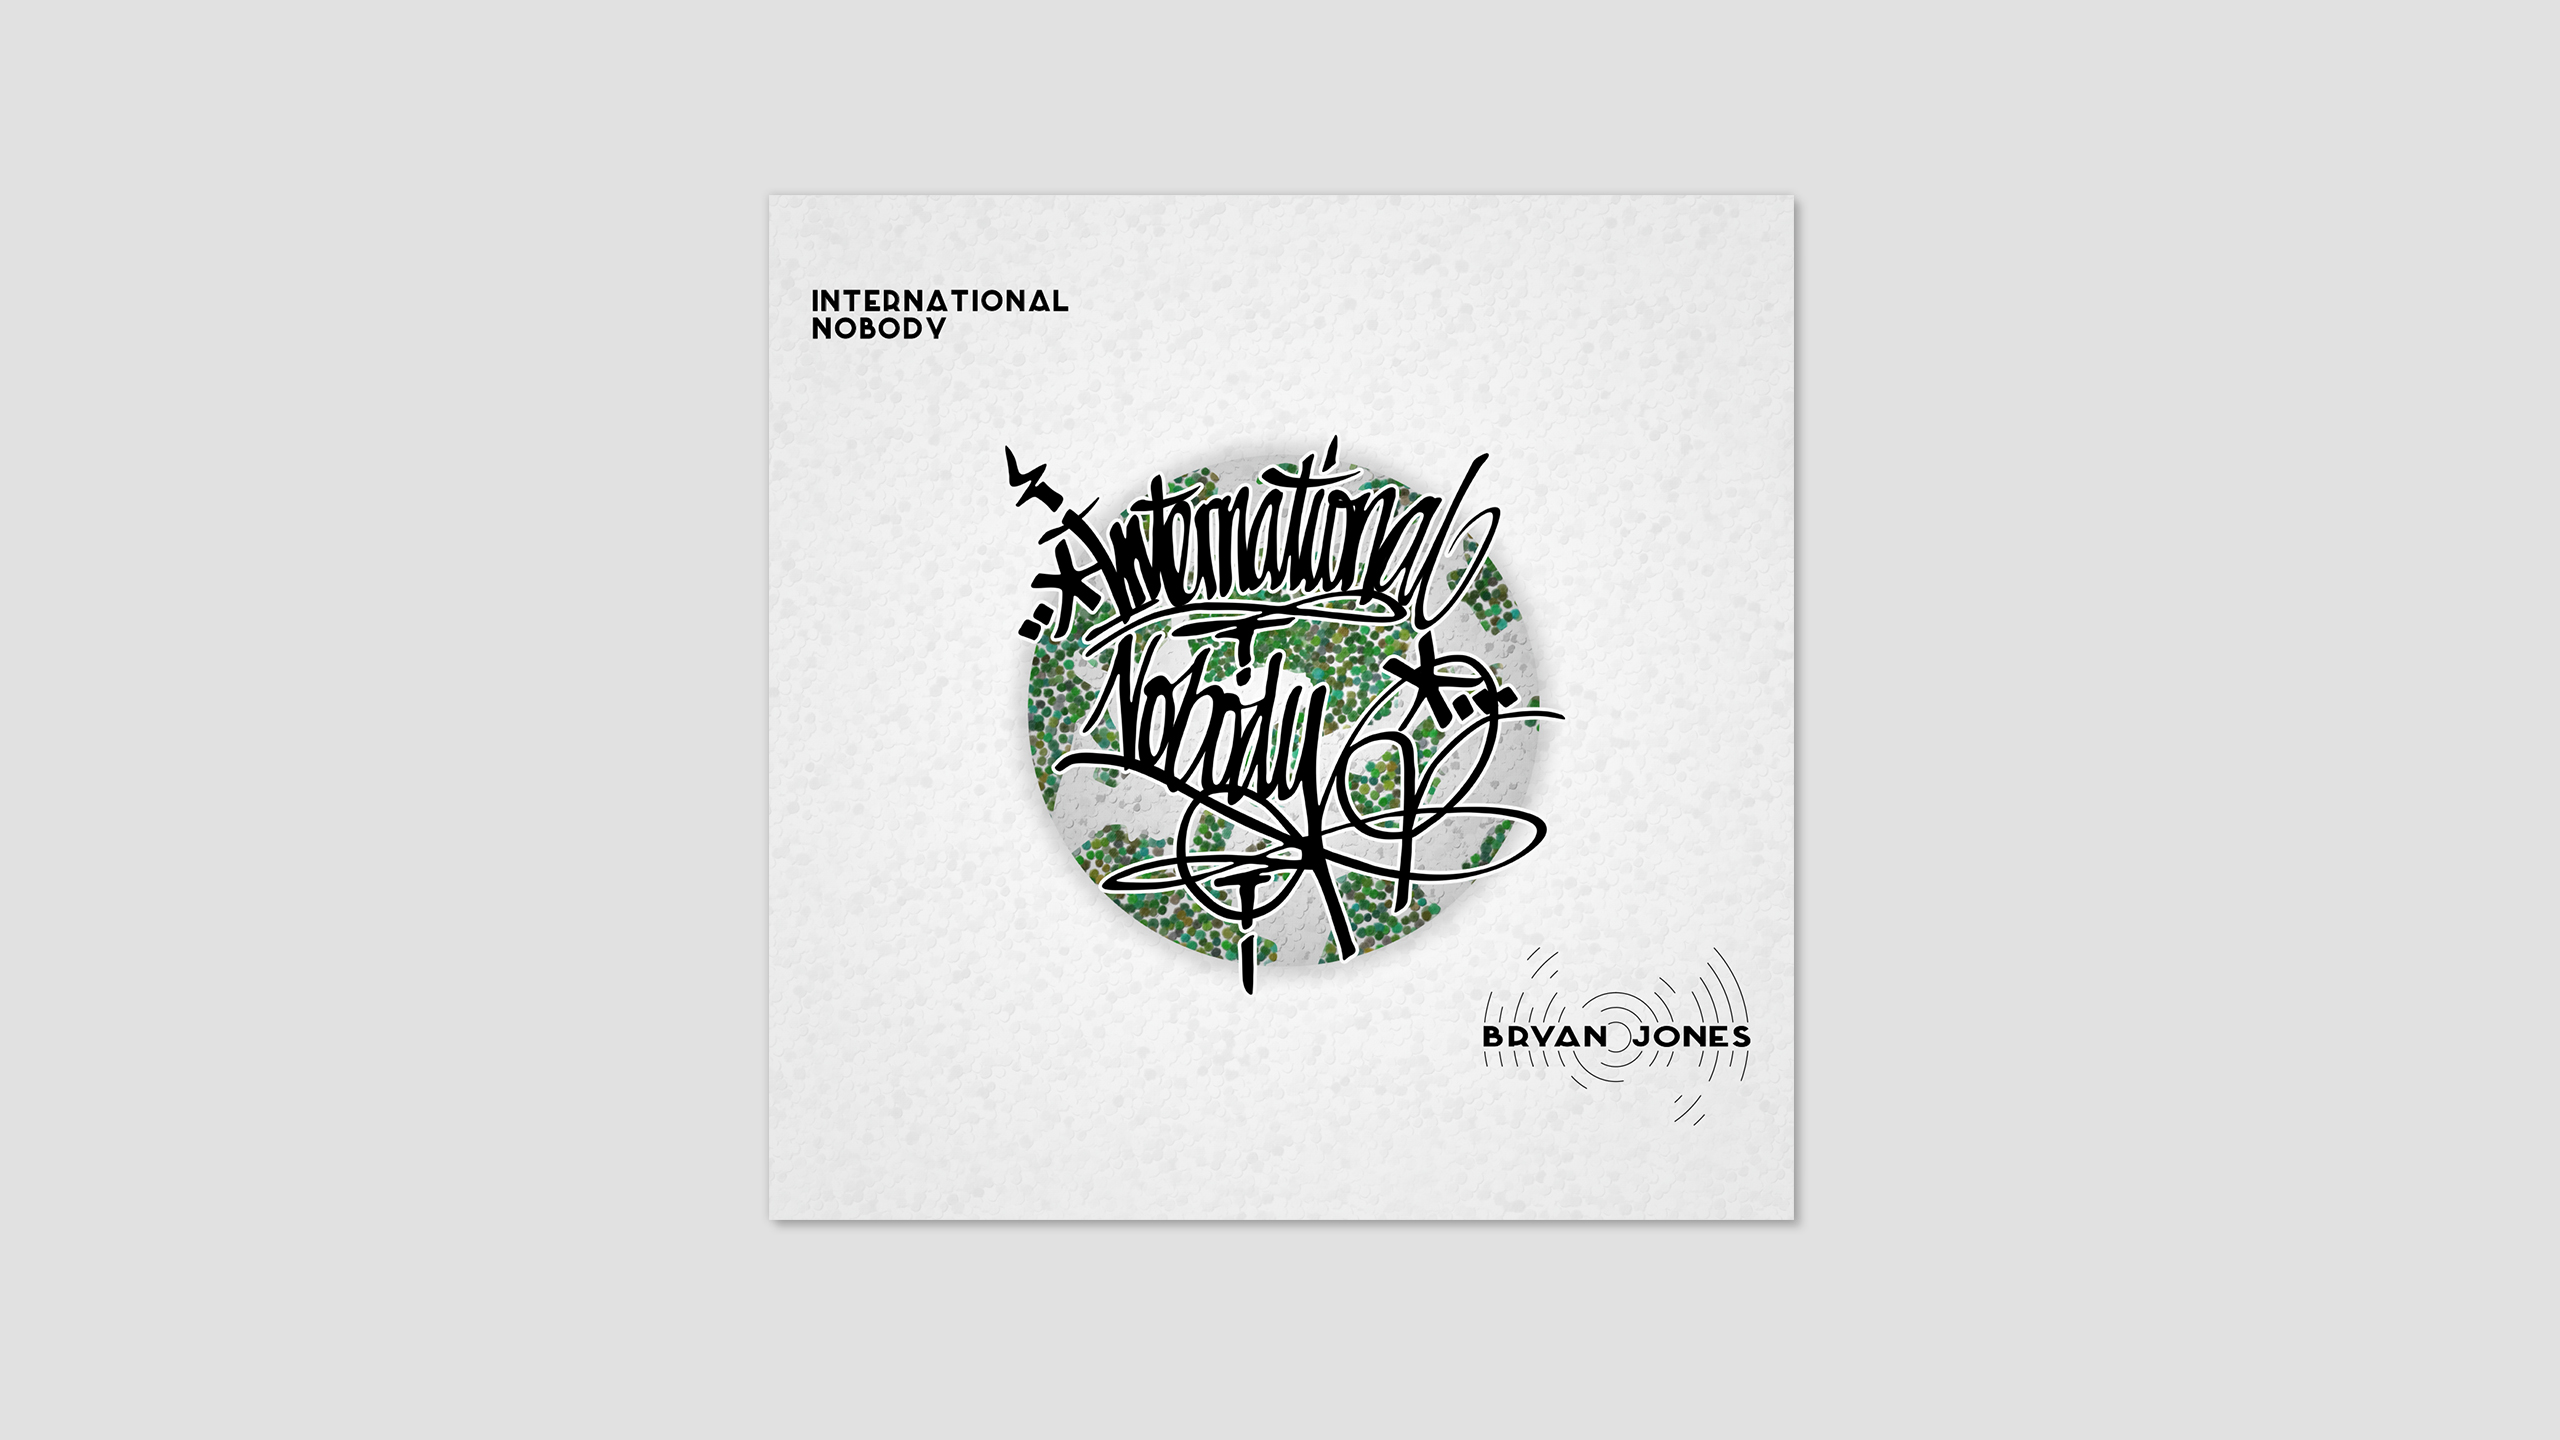 Illustration and design by dephined for Bryan Jones - International Nobody